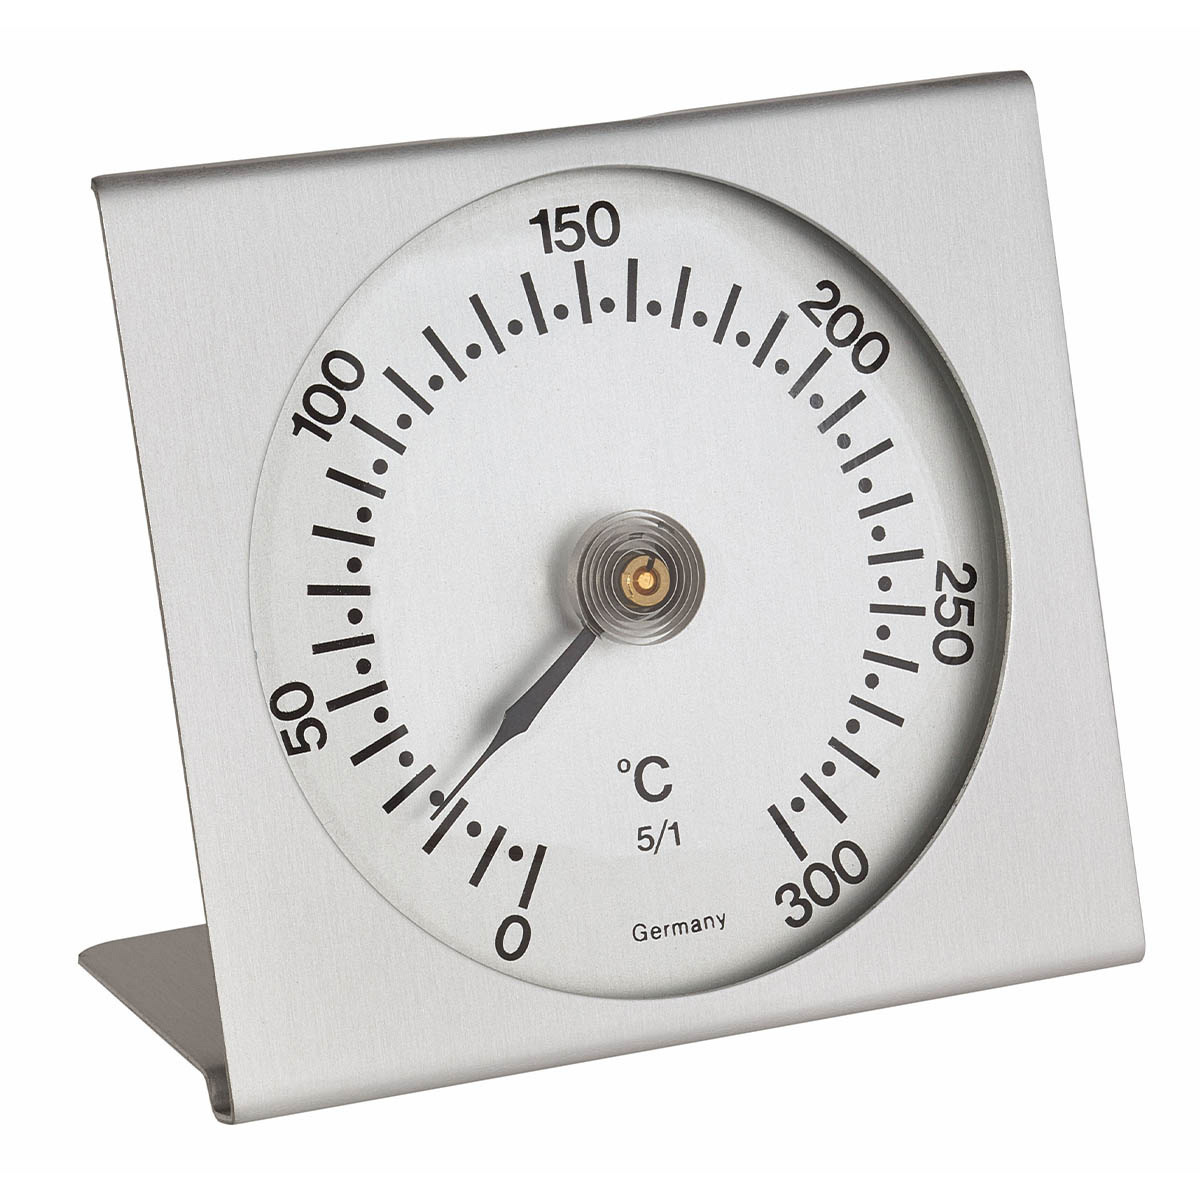 14-1004-55-analoges-backofenthermometer-metall-1200x1200px.jpg